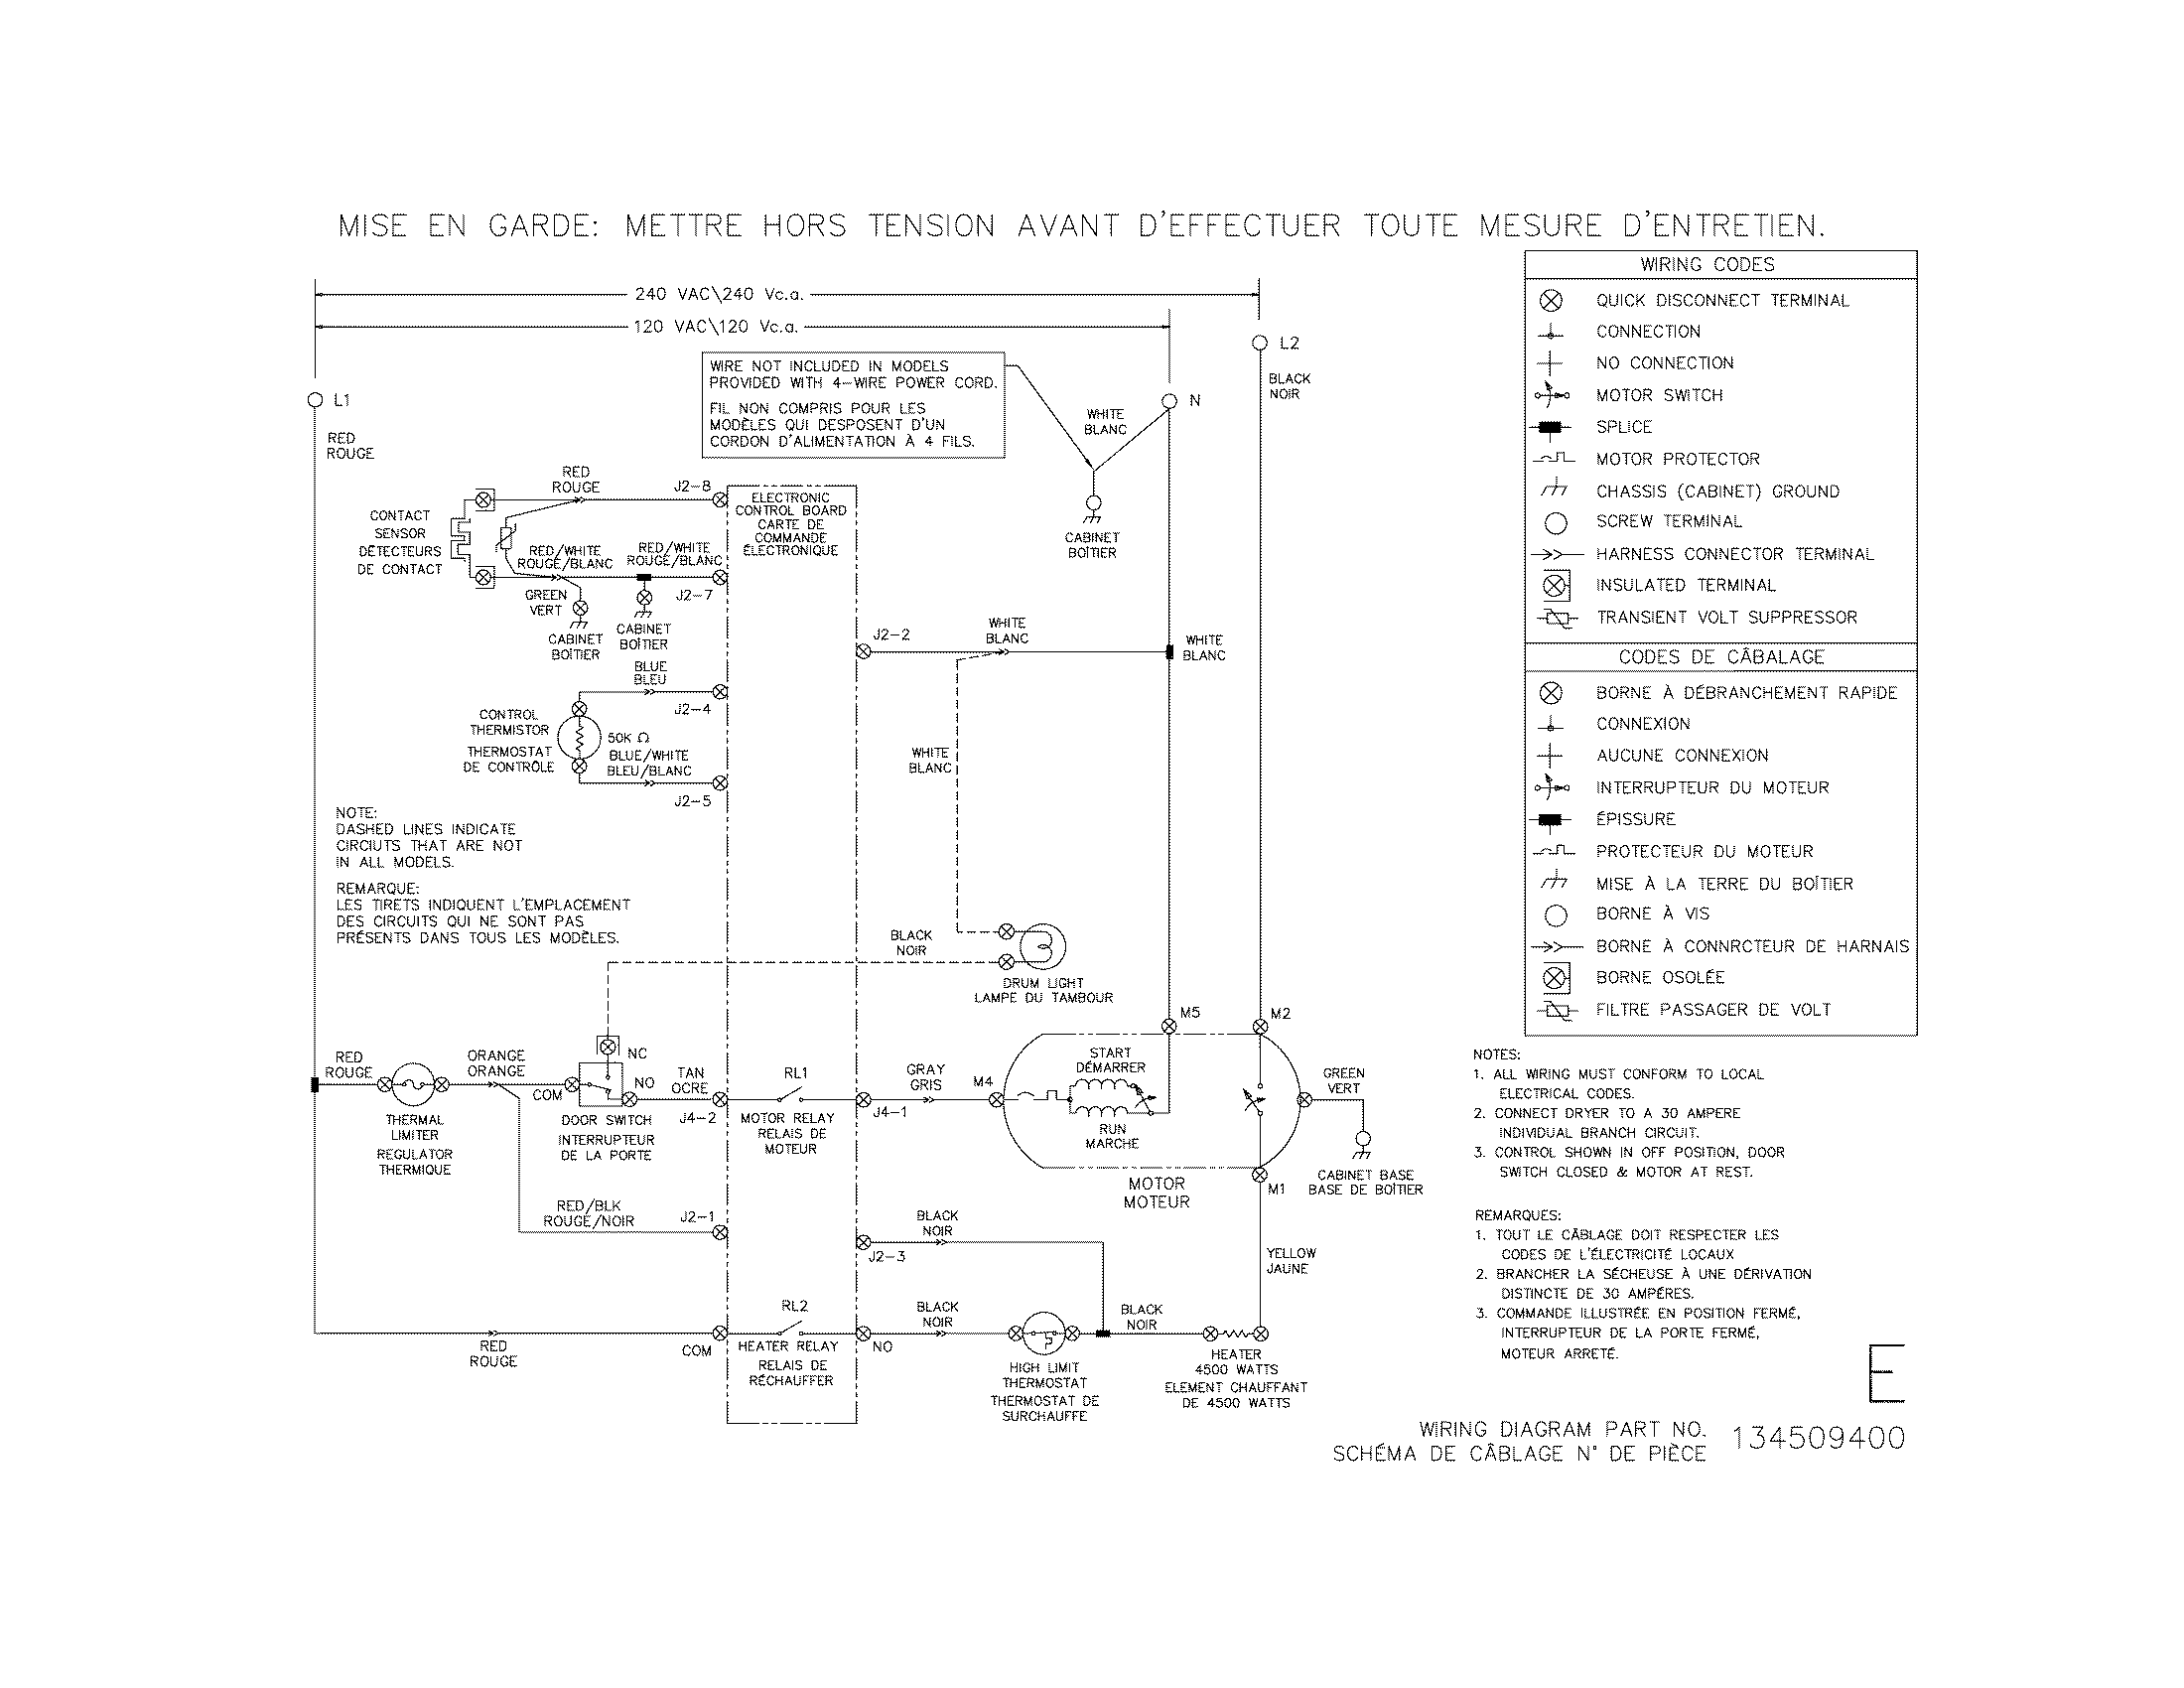 Frigidaire Affinity Dryer Wiring Diagram from c.searspartsdirect.com